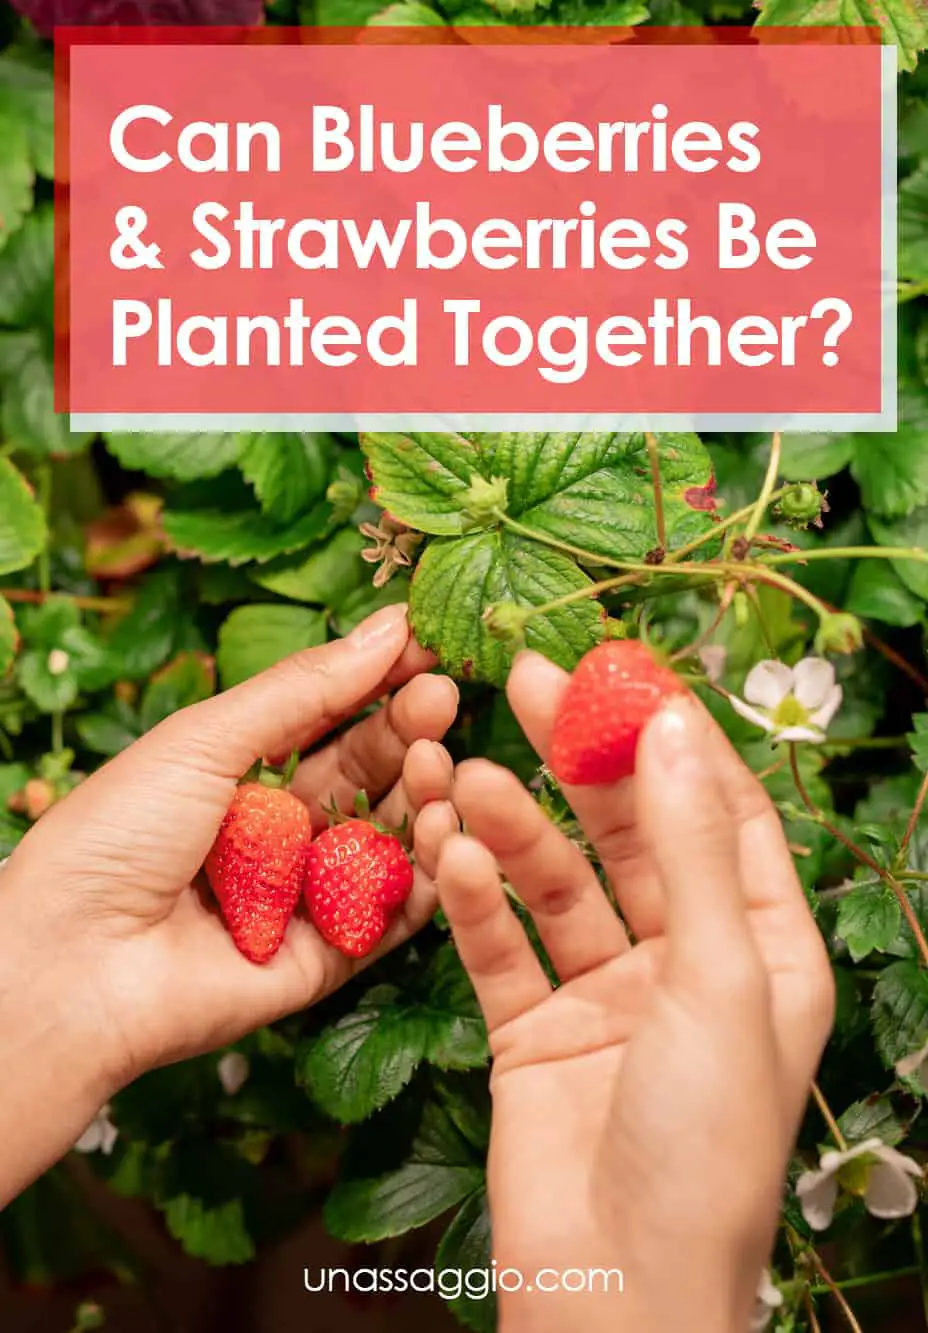 Can blueberries and strawberries be planted together?